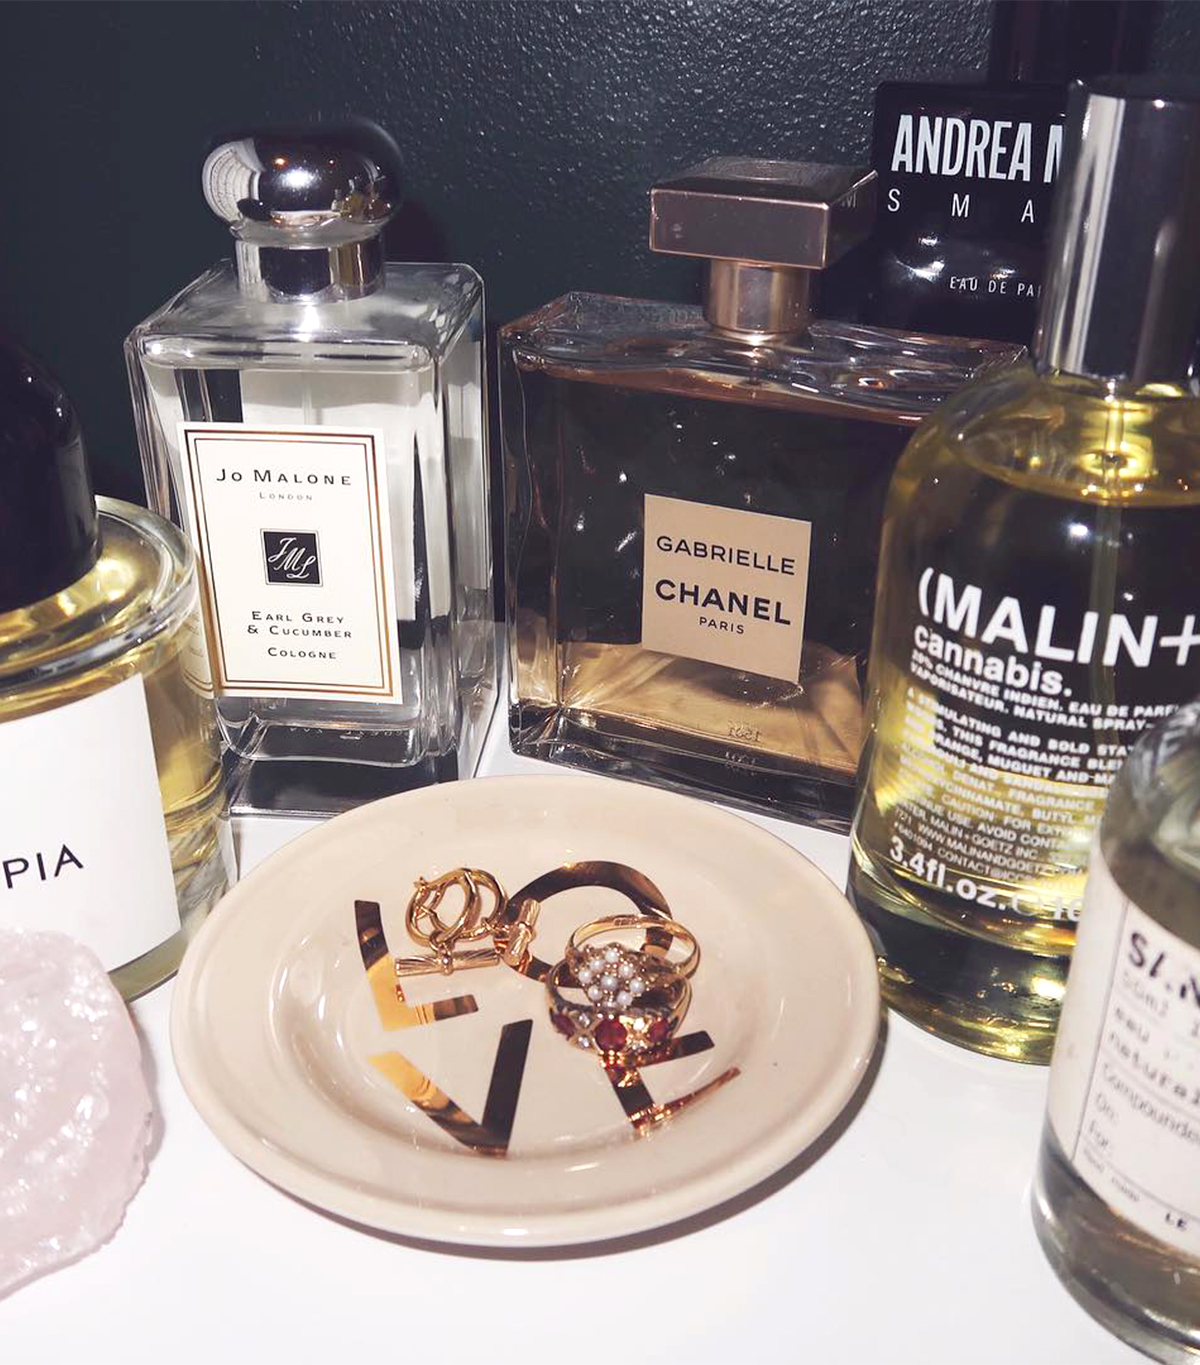 Found: The 16 Most Iconic French Perfume Brands of All Time